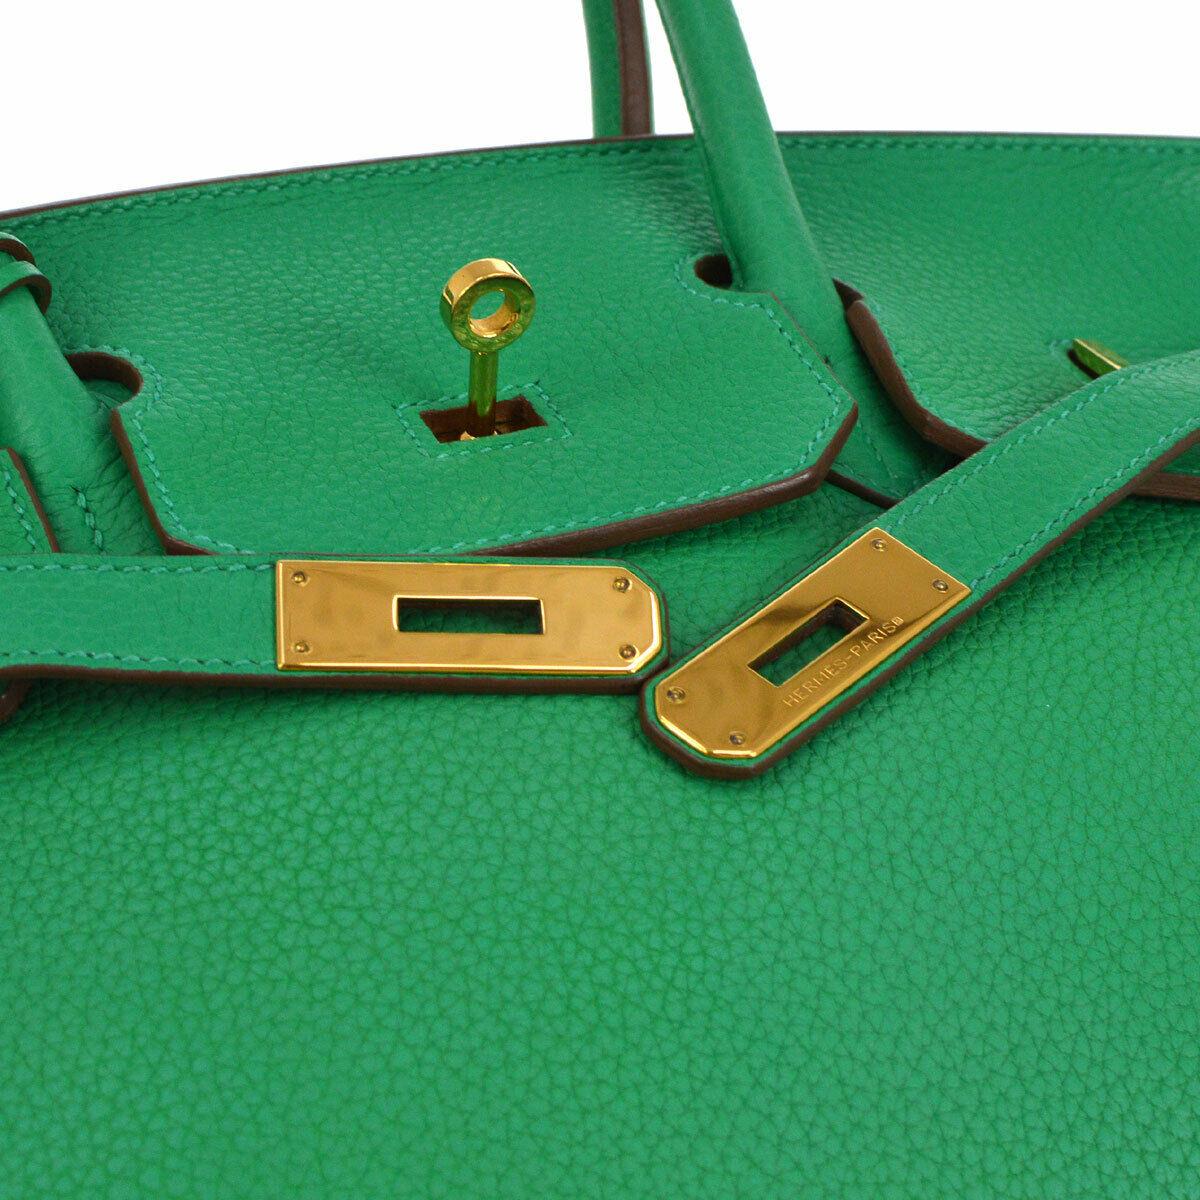 Hermes Birkin 35 Apple Green Leather Gold Carryall Travel Top Handle Satchel Tote

Leather
Gold tone hardware
Leather lining
Date code present
Made in France
Handle drop 4.25